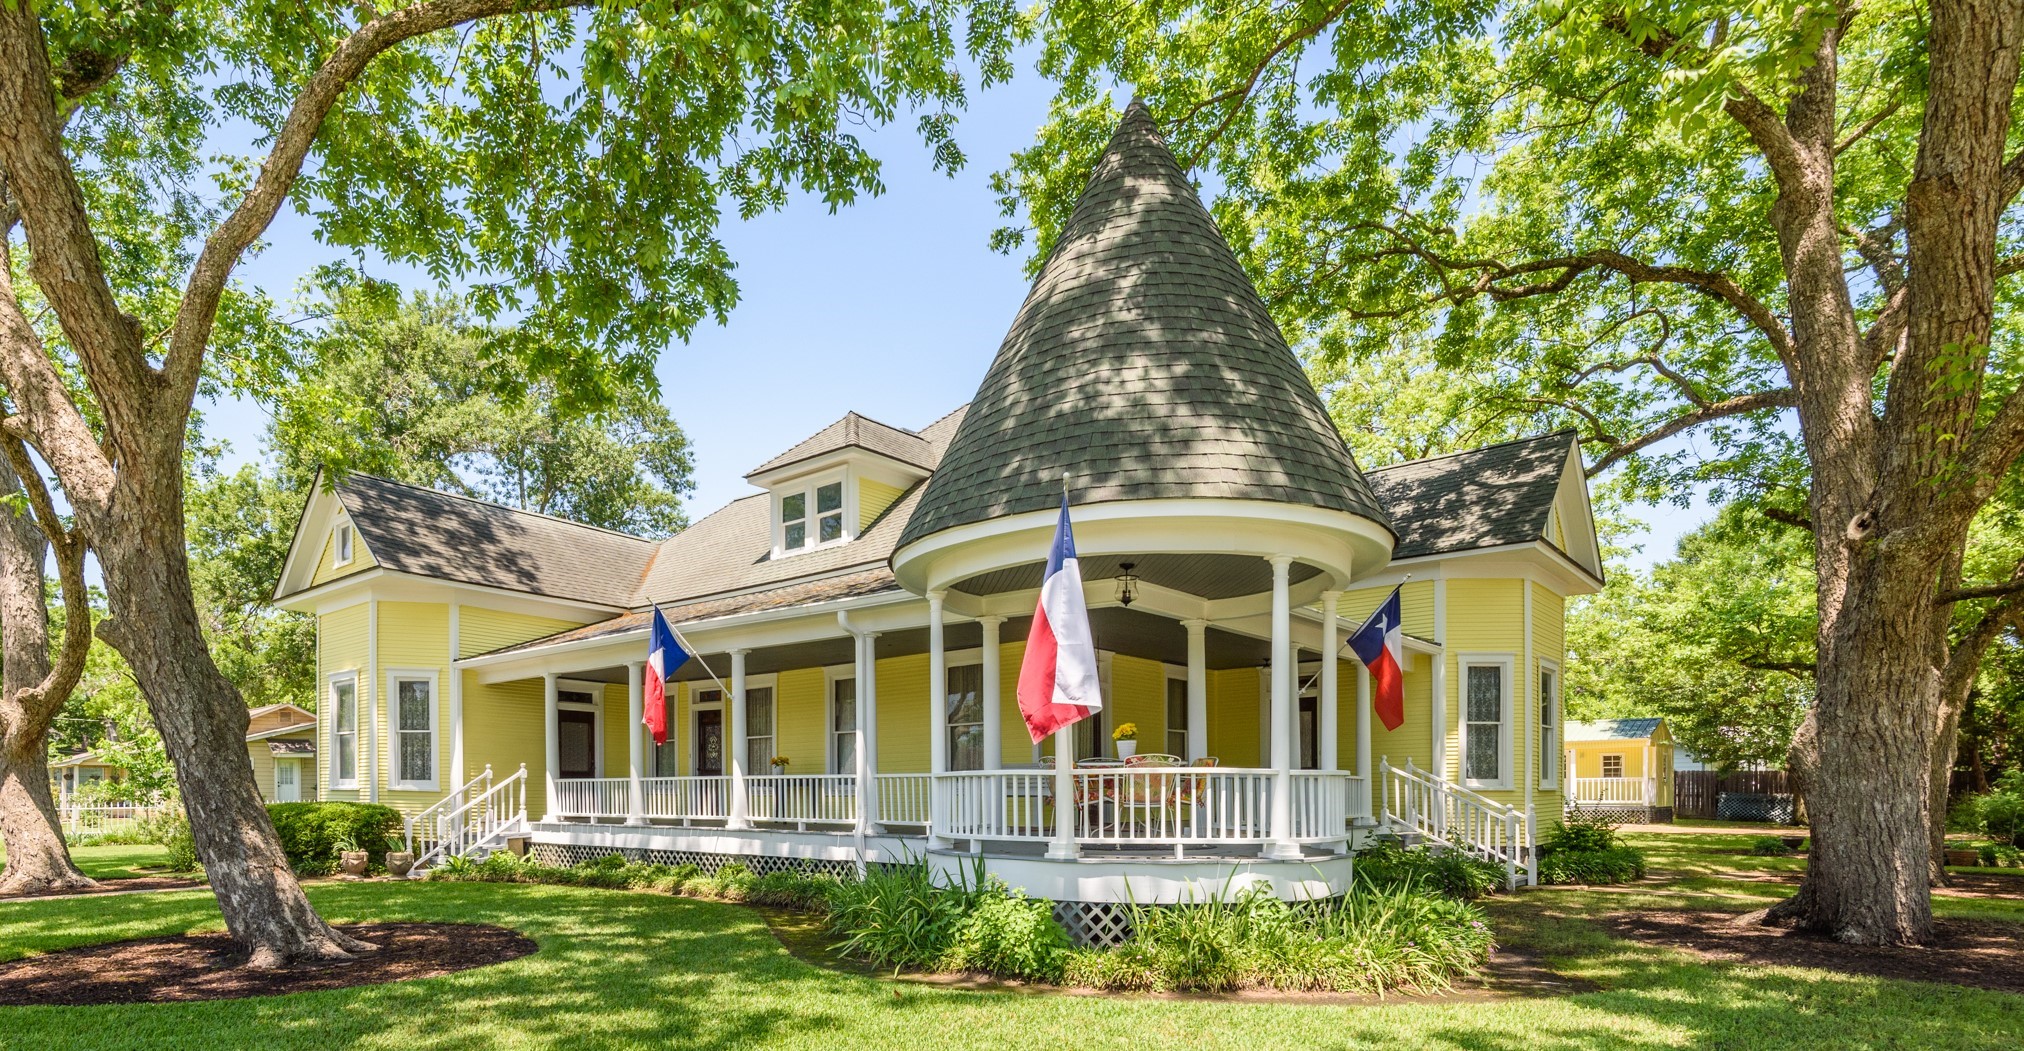 Don’t miss your opportunity to own Montgomery’s most iconic home!